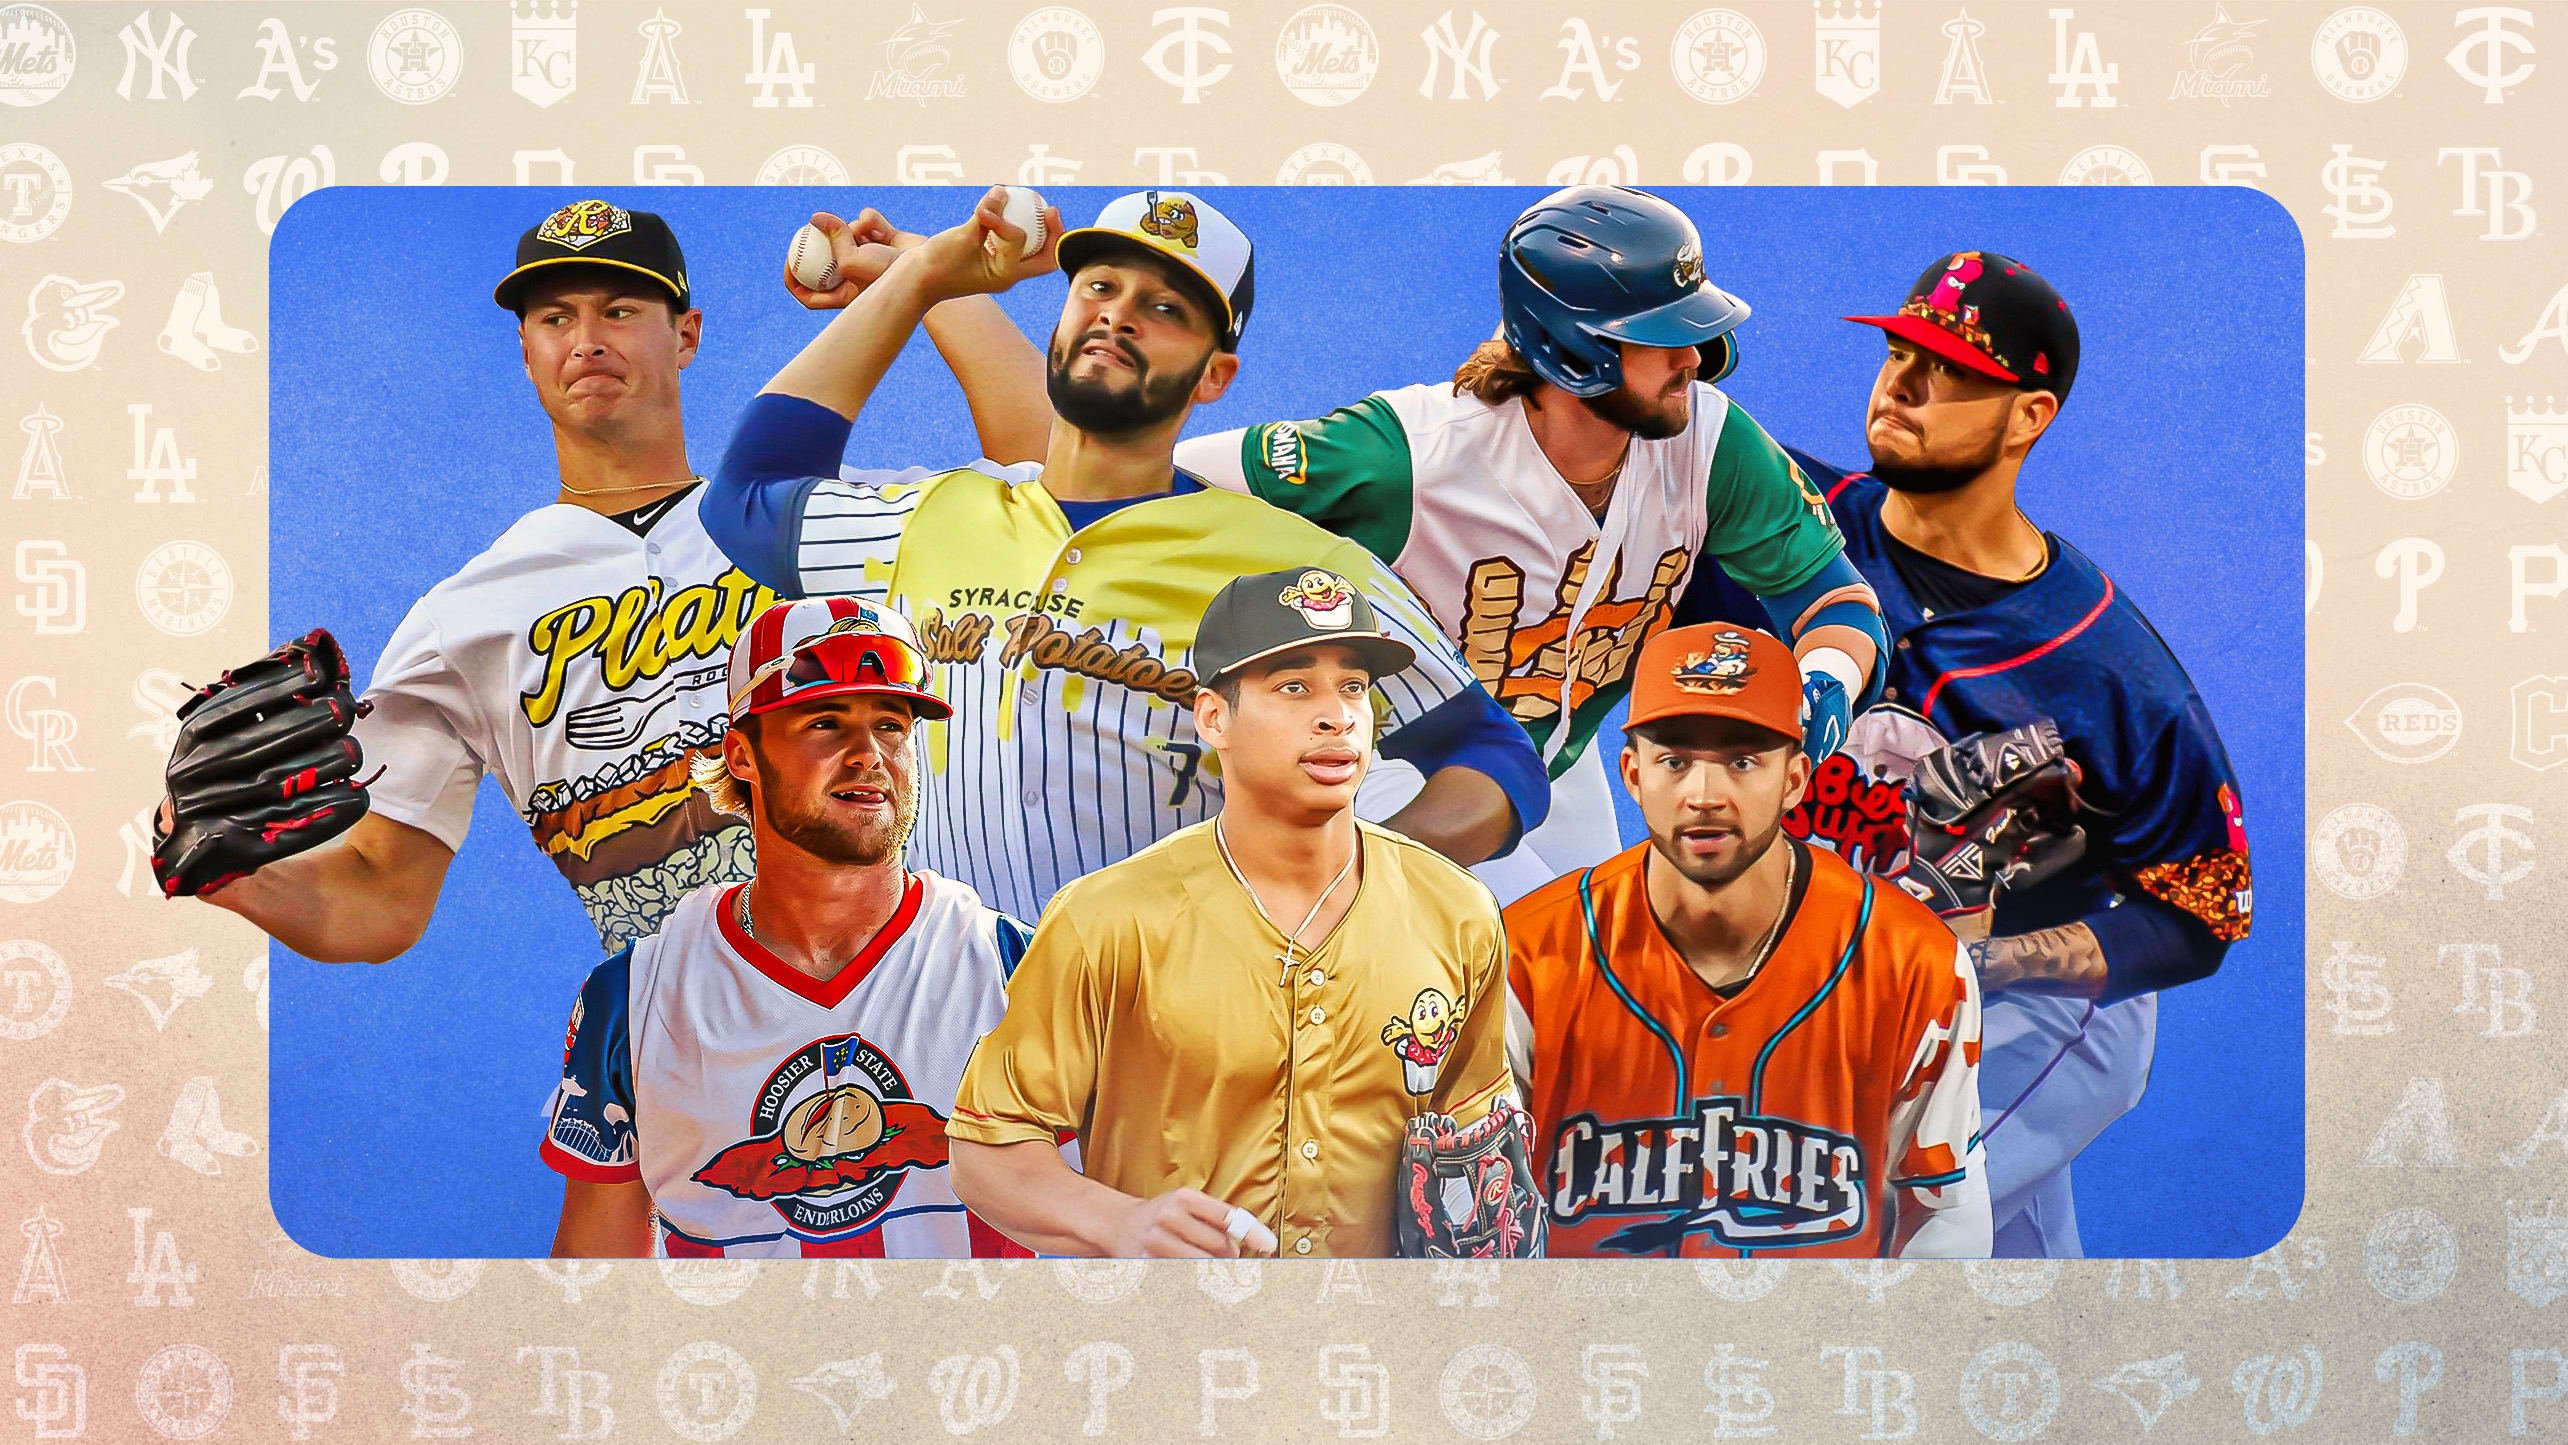 A montage of Minor League players in alternate uniforms